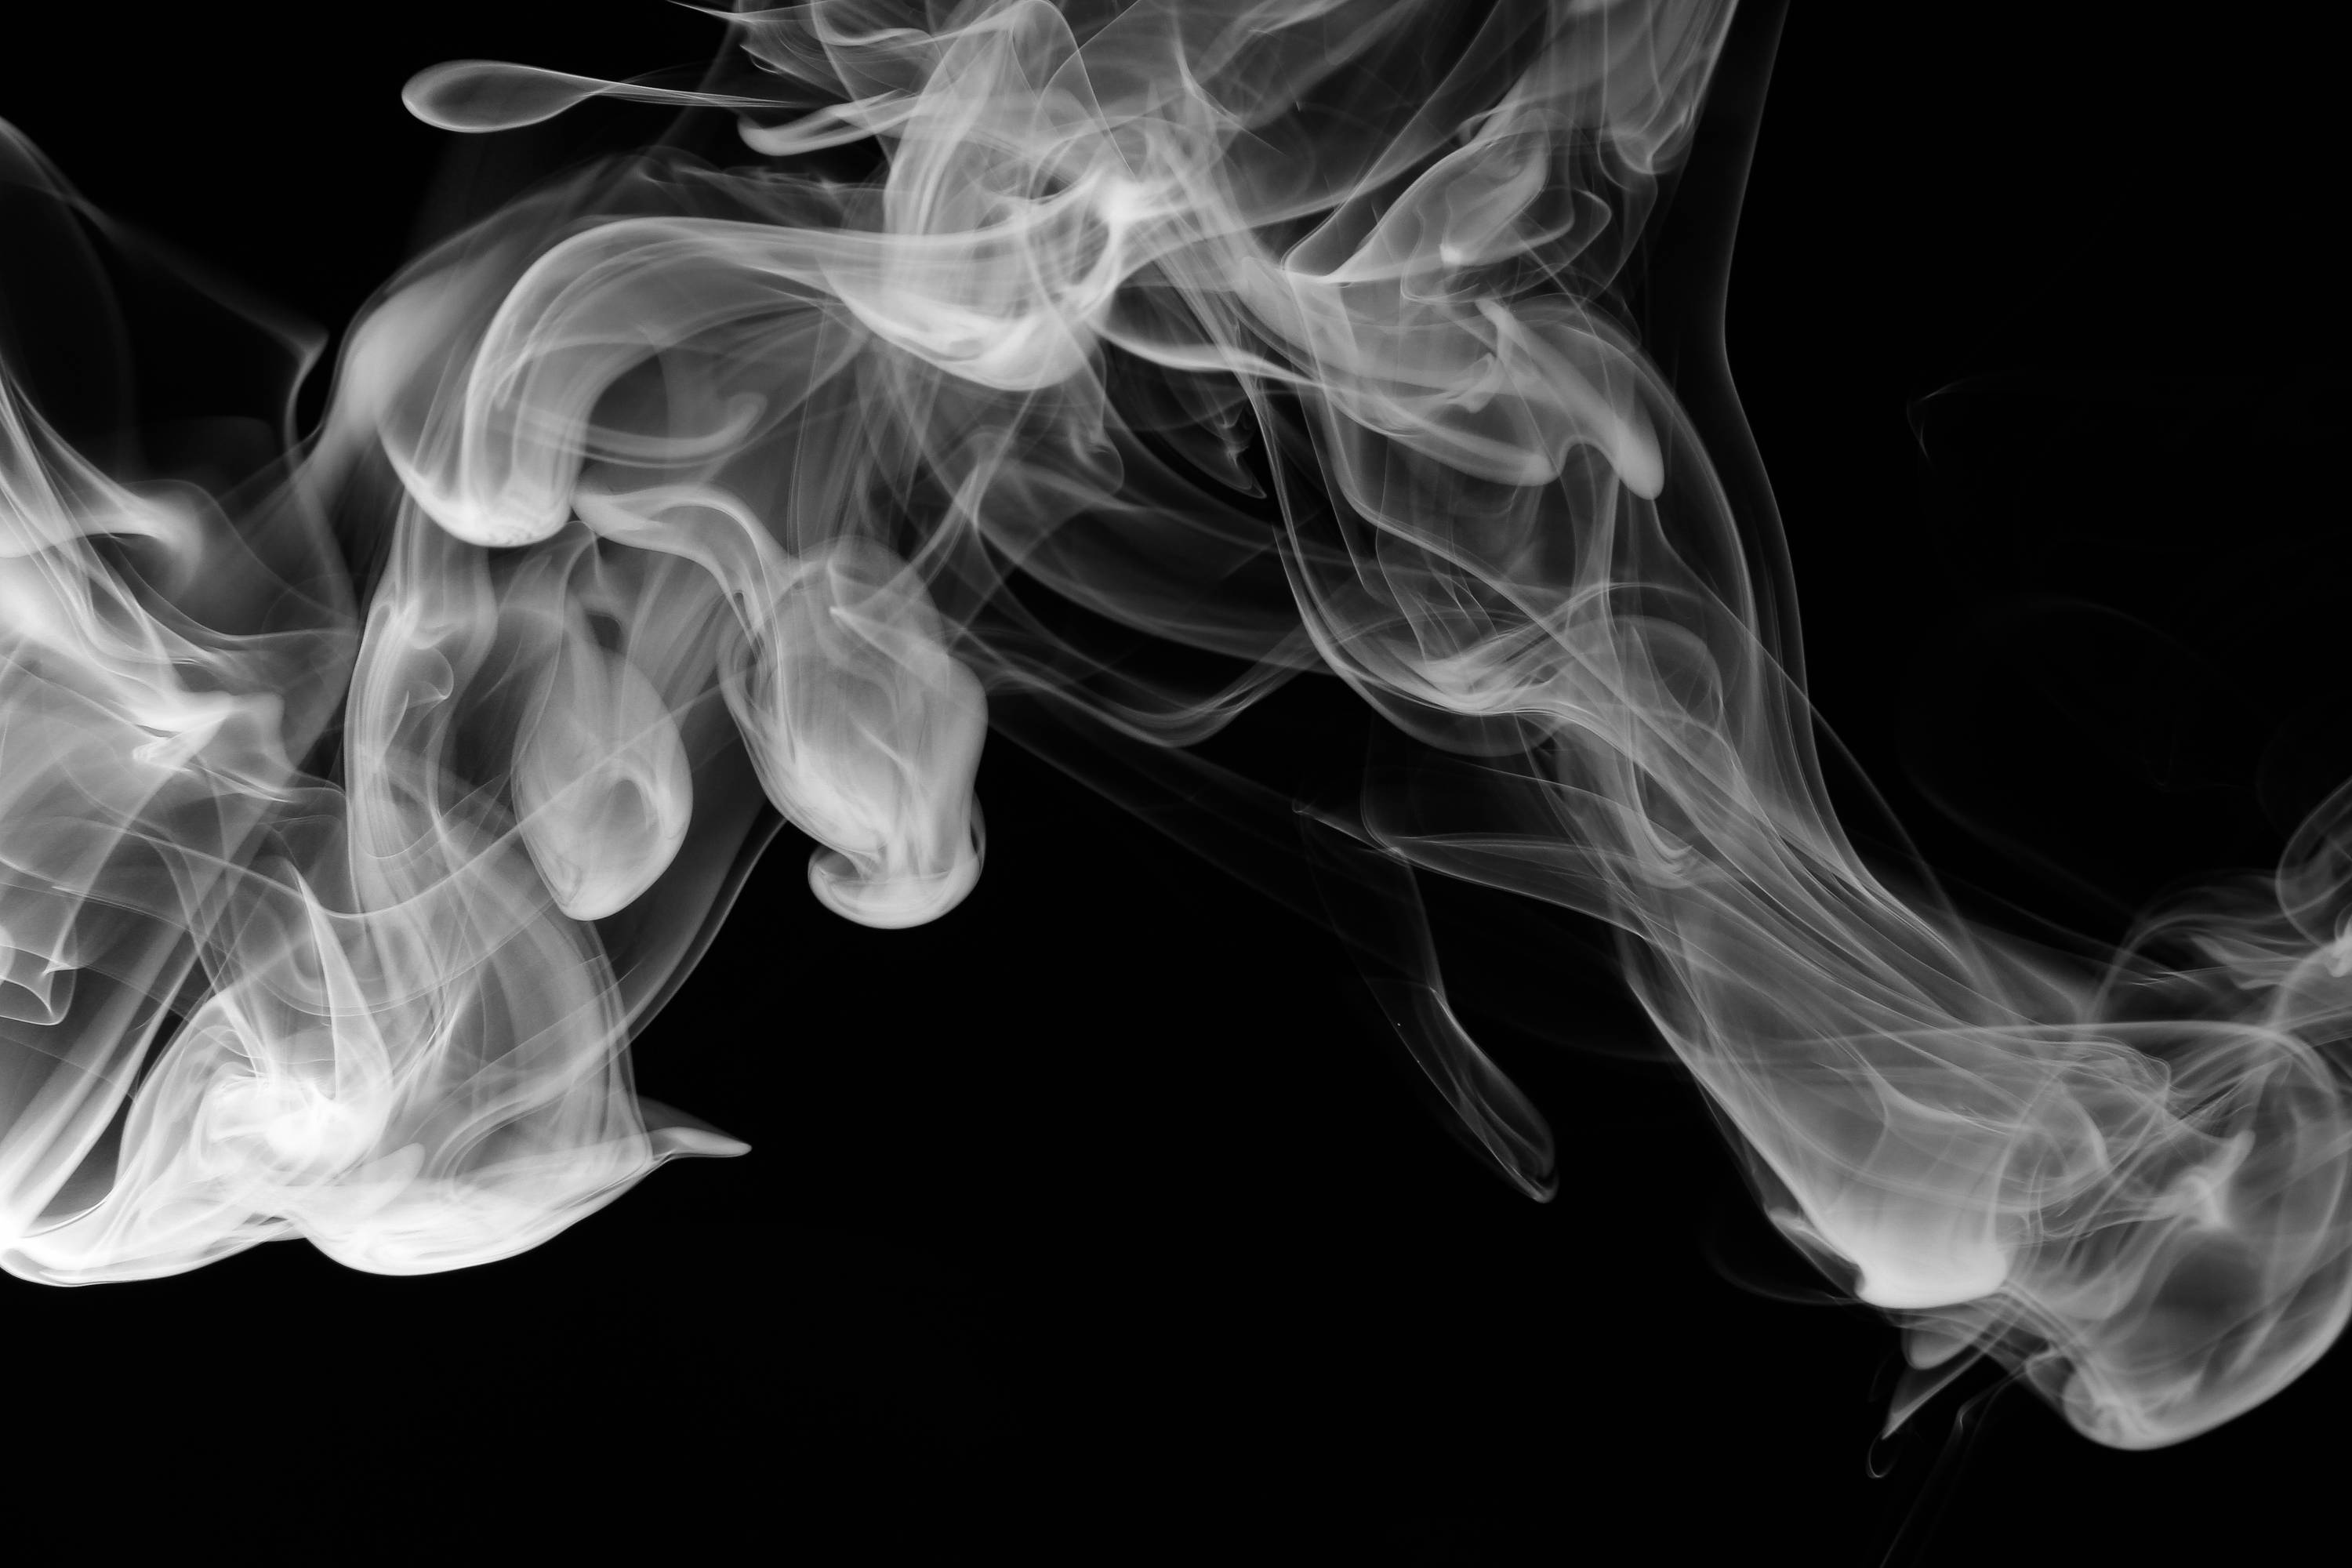 Smoke from a vape cart against black background